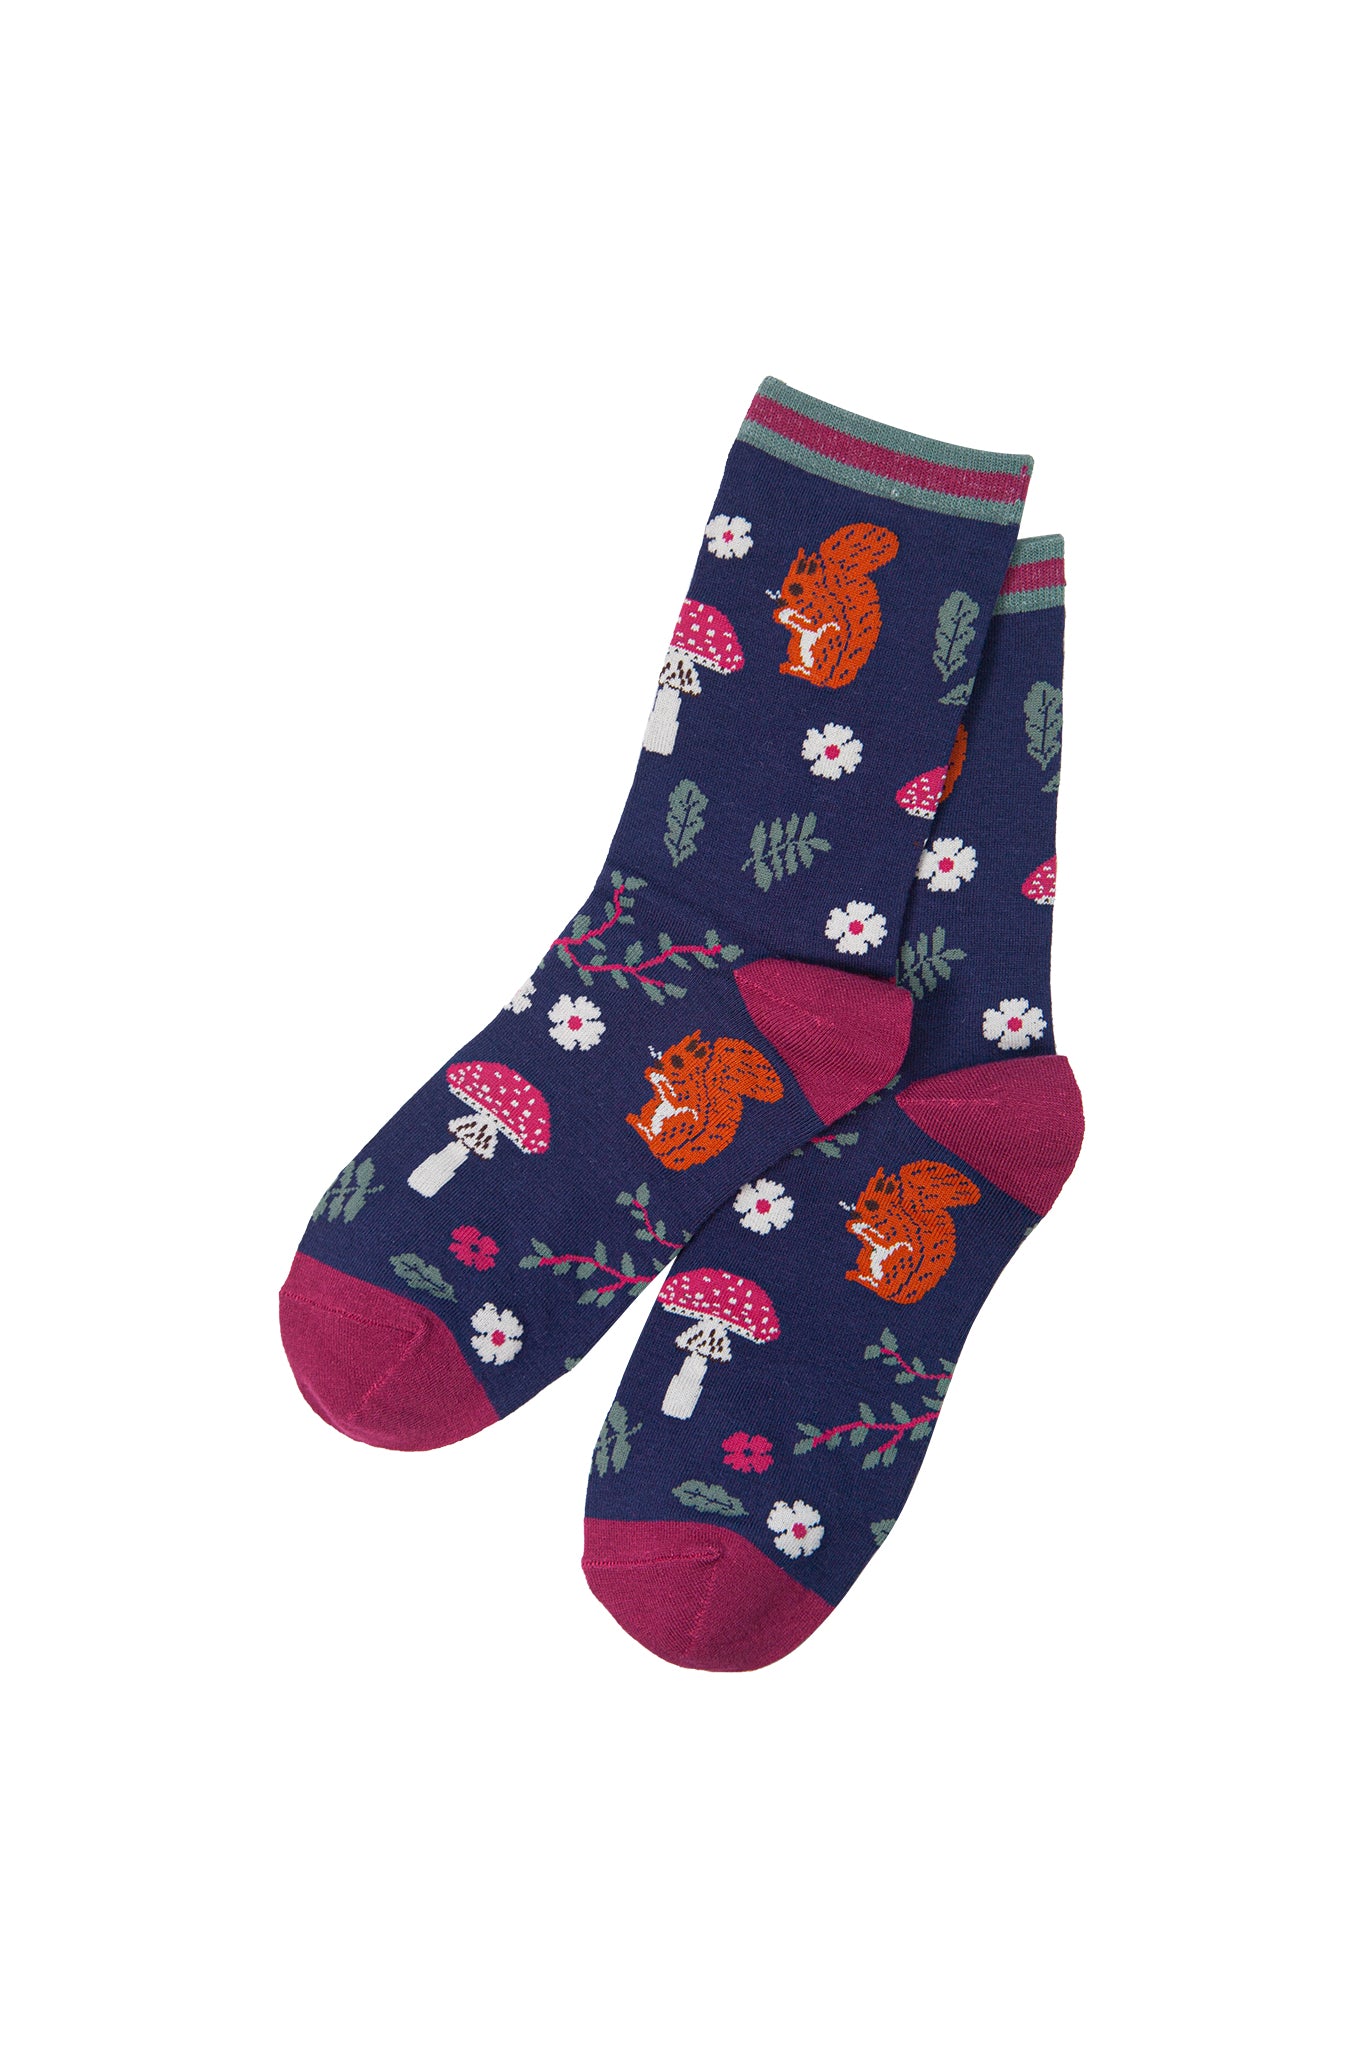 woodland animal themed bamboo socks with red squirrels and flowers